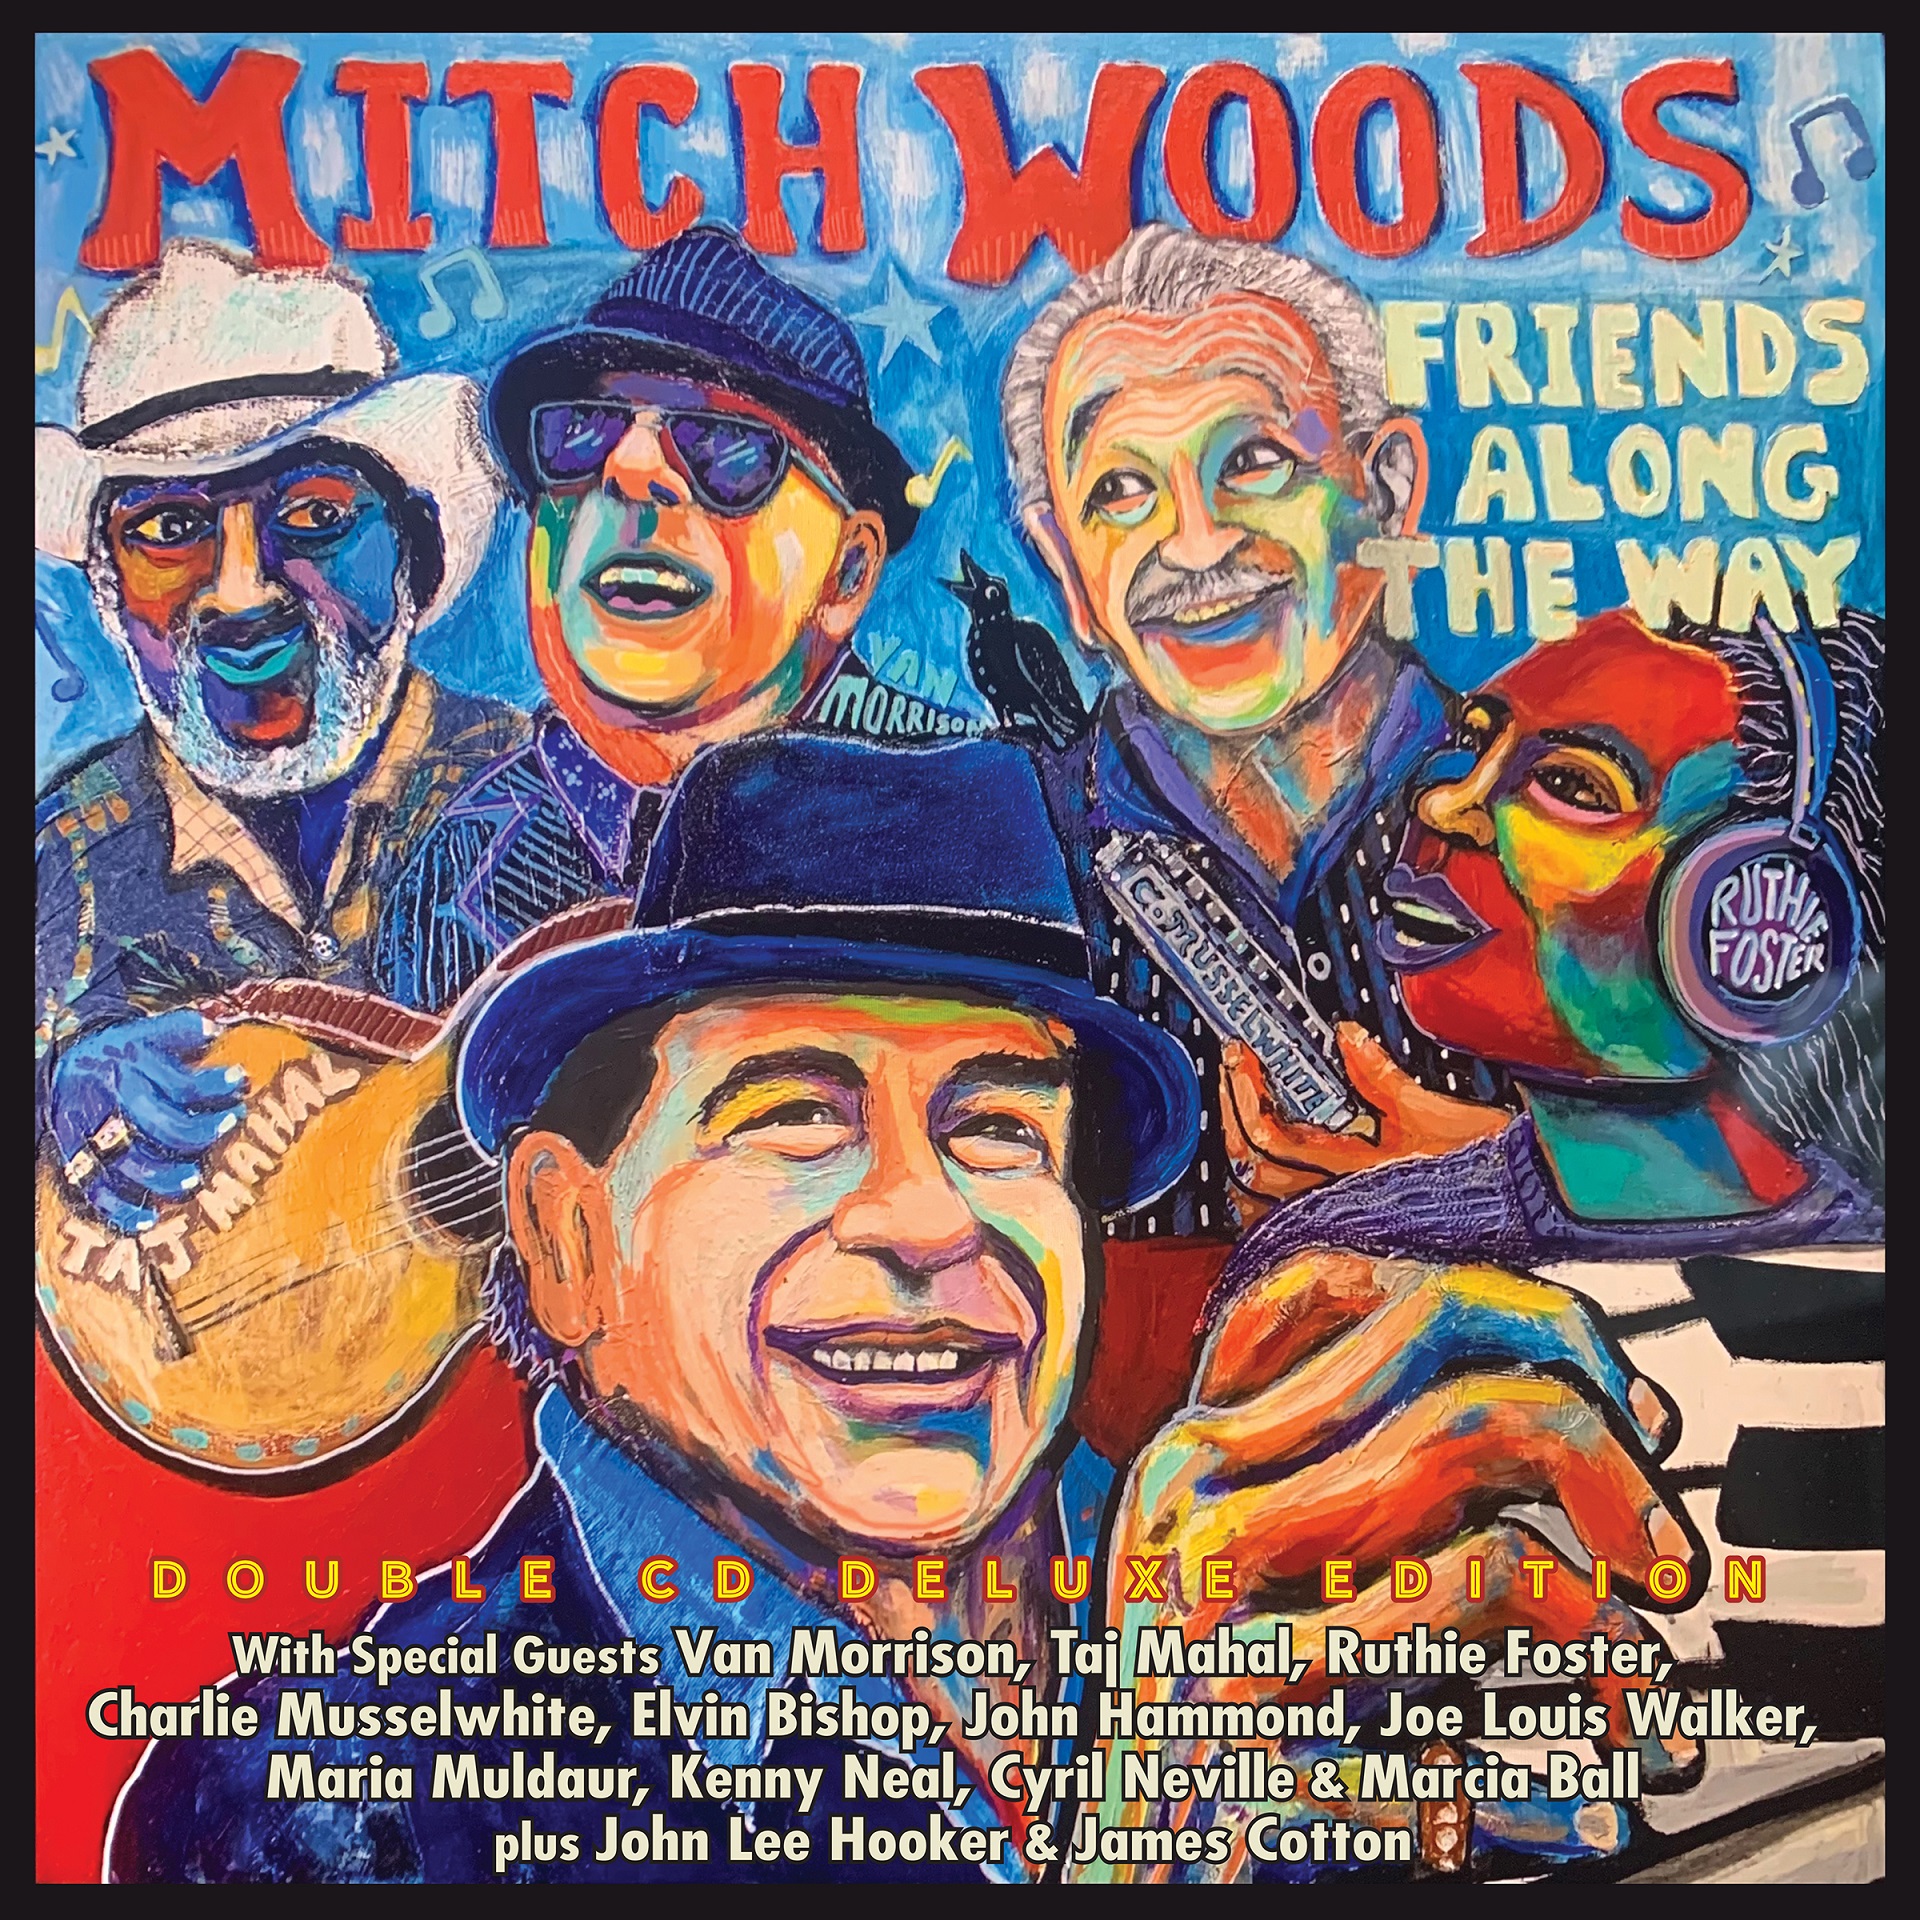 Keyboard Wizard Mitch Woods Sets August 18 Release Date for His Expanded Deluxe Edition of Friends Along the Way